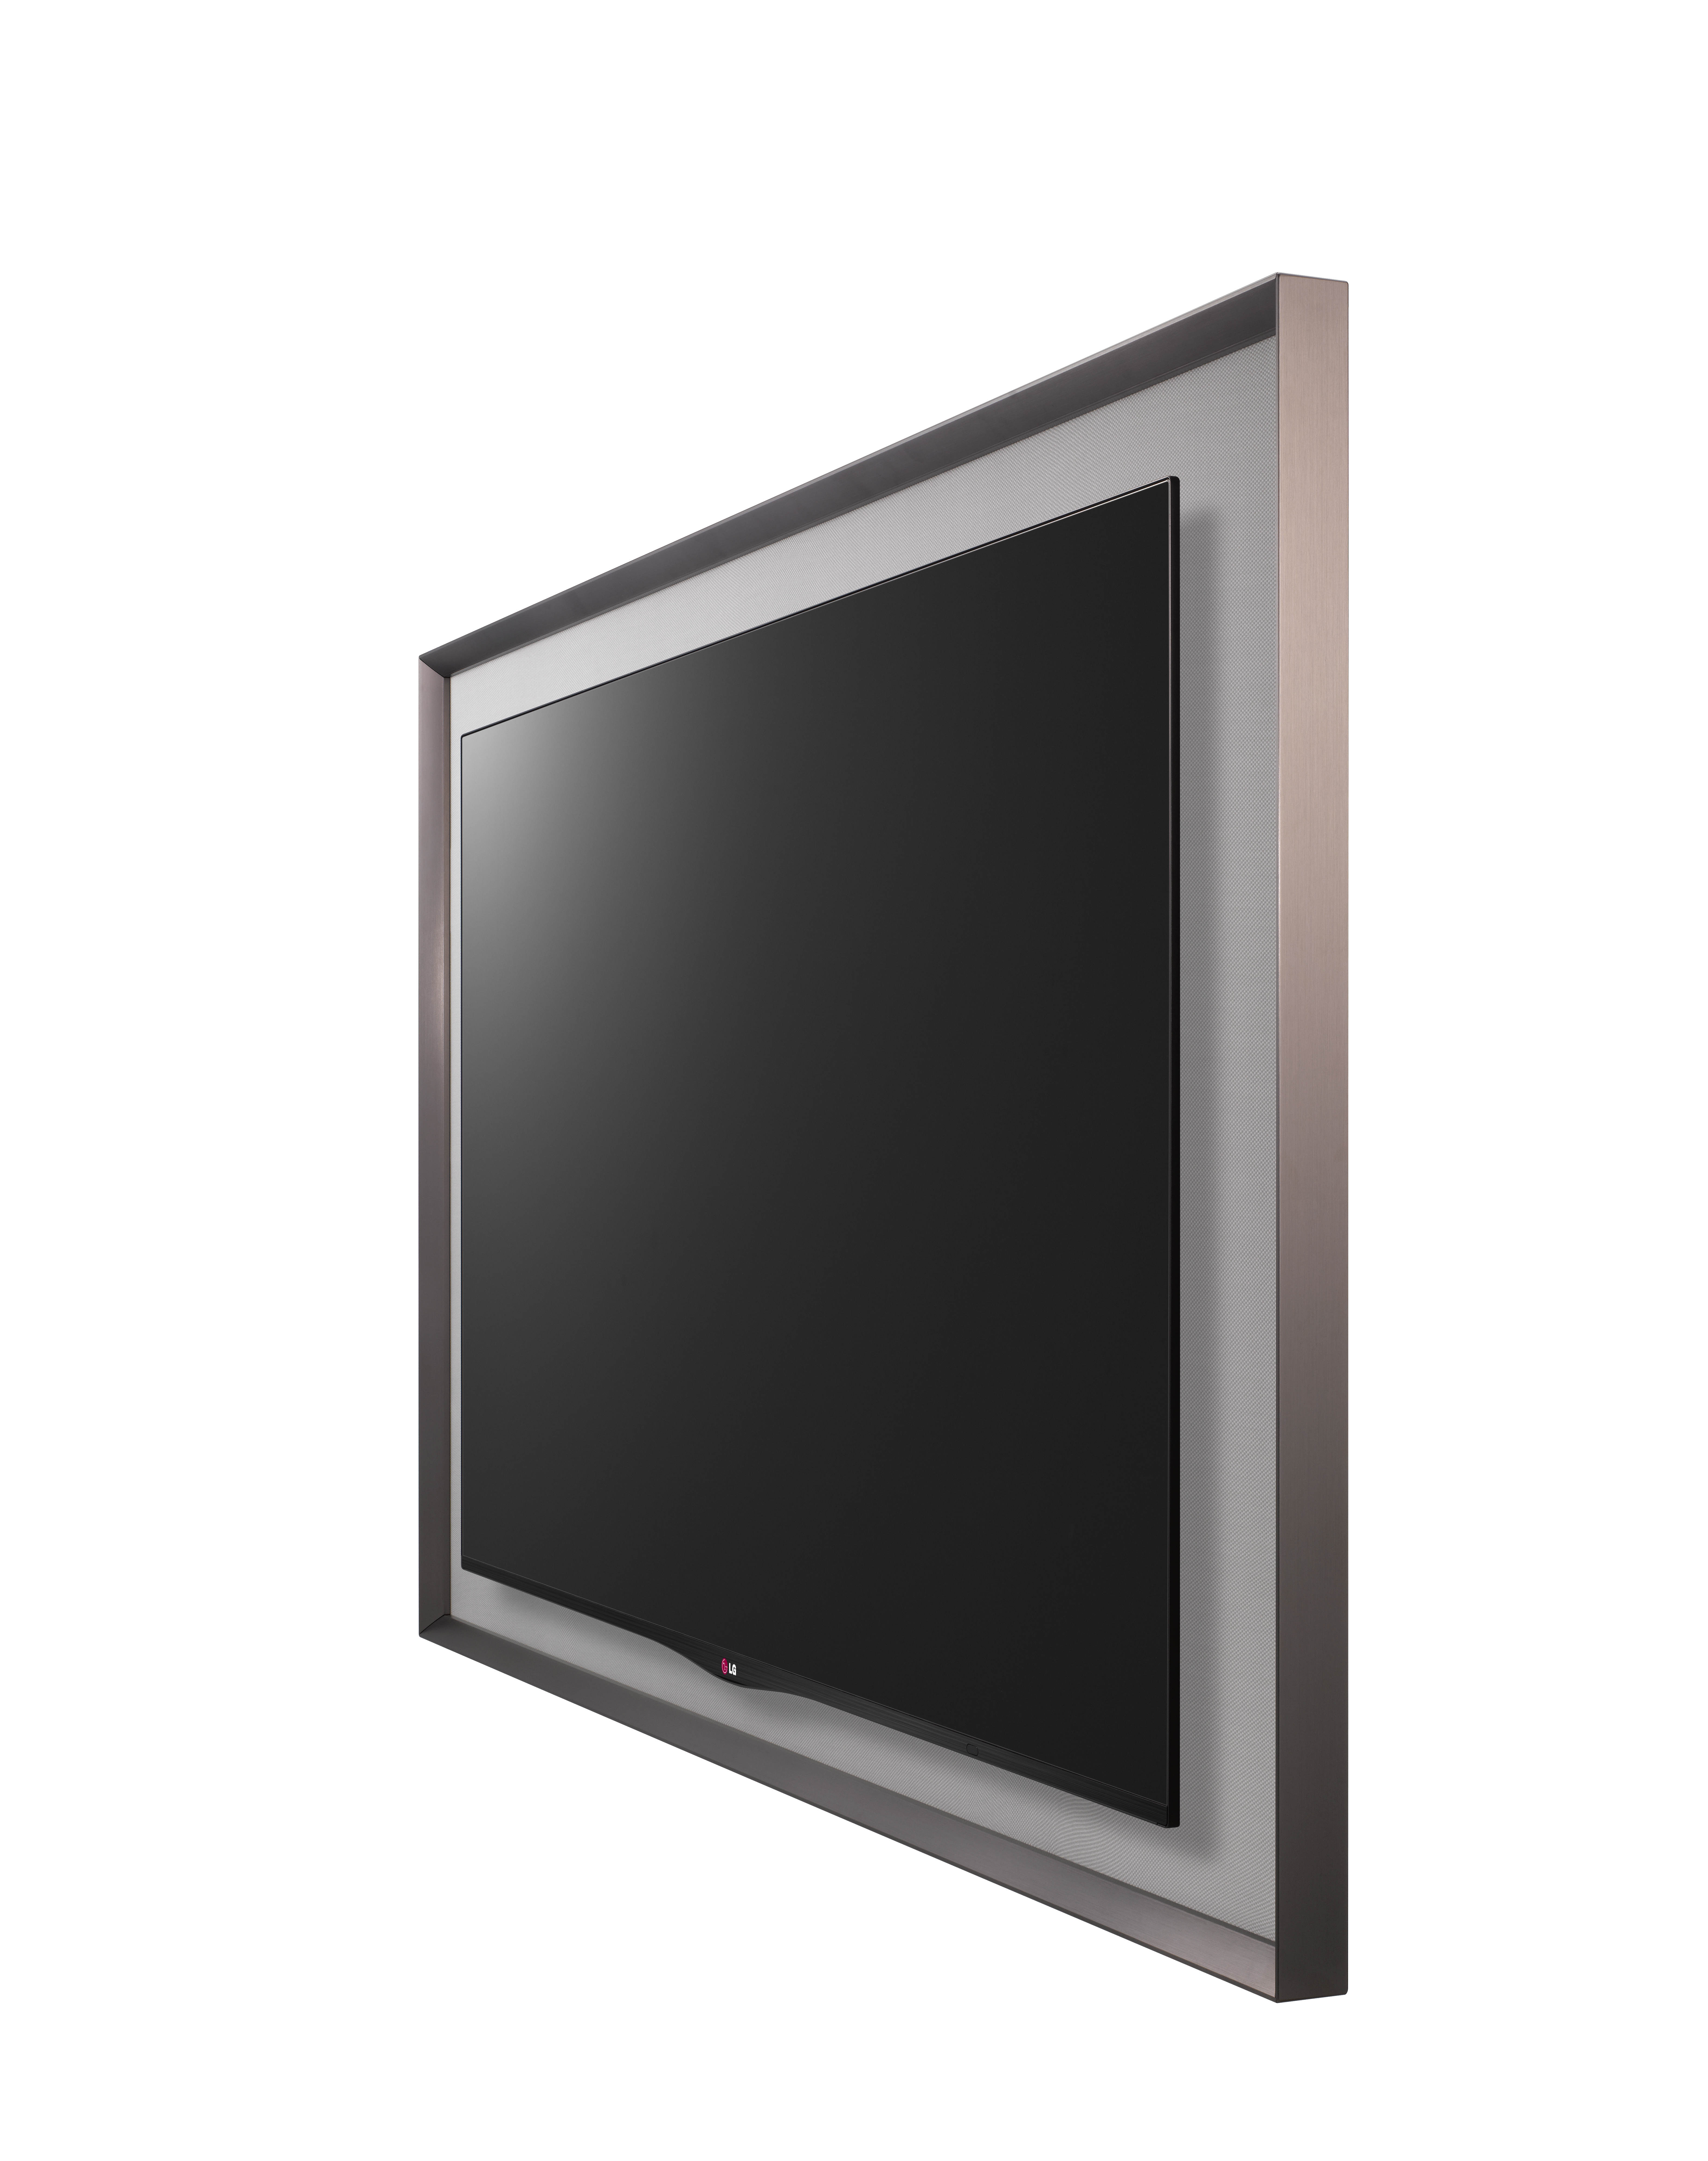 A right-side view of LG GALLERY OLED TV model 55EA8800